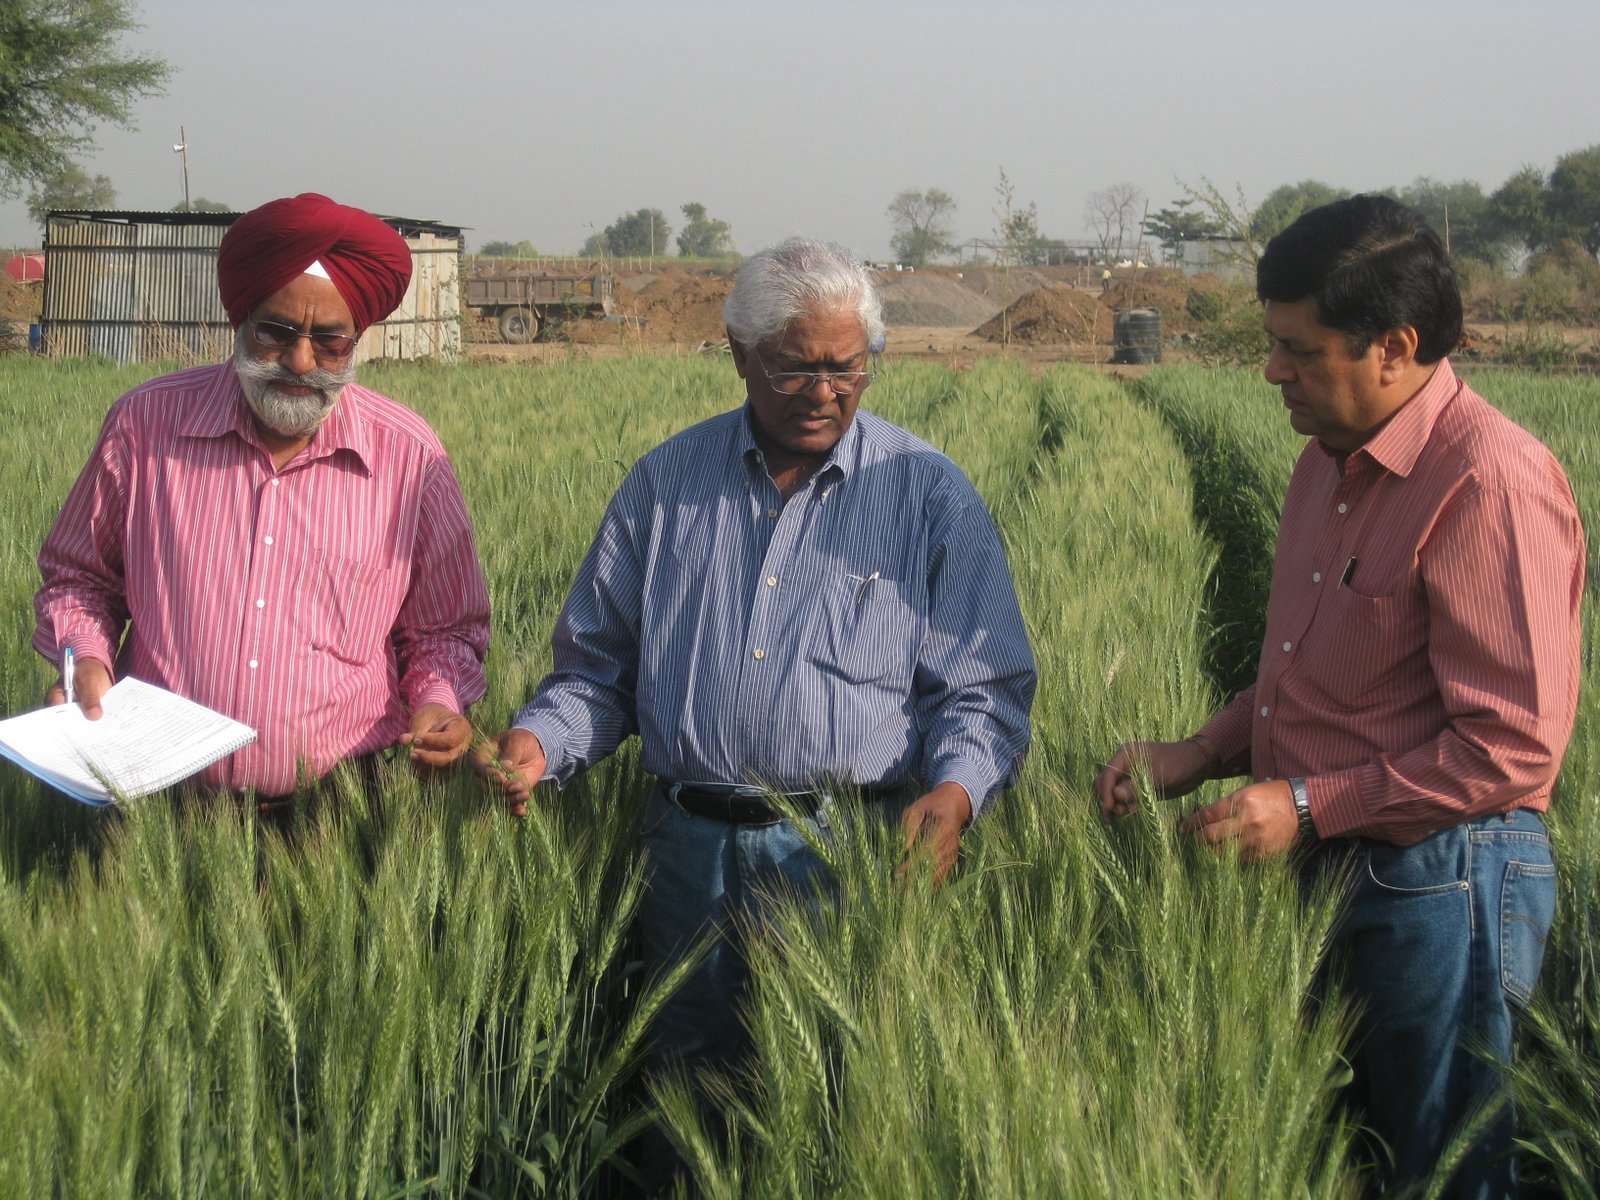 His research has led to the development of hundreds of improved wheat varieties